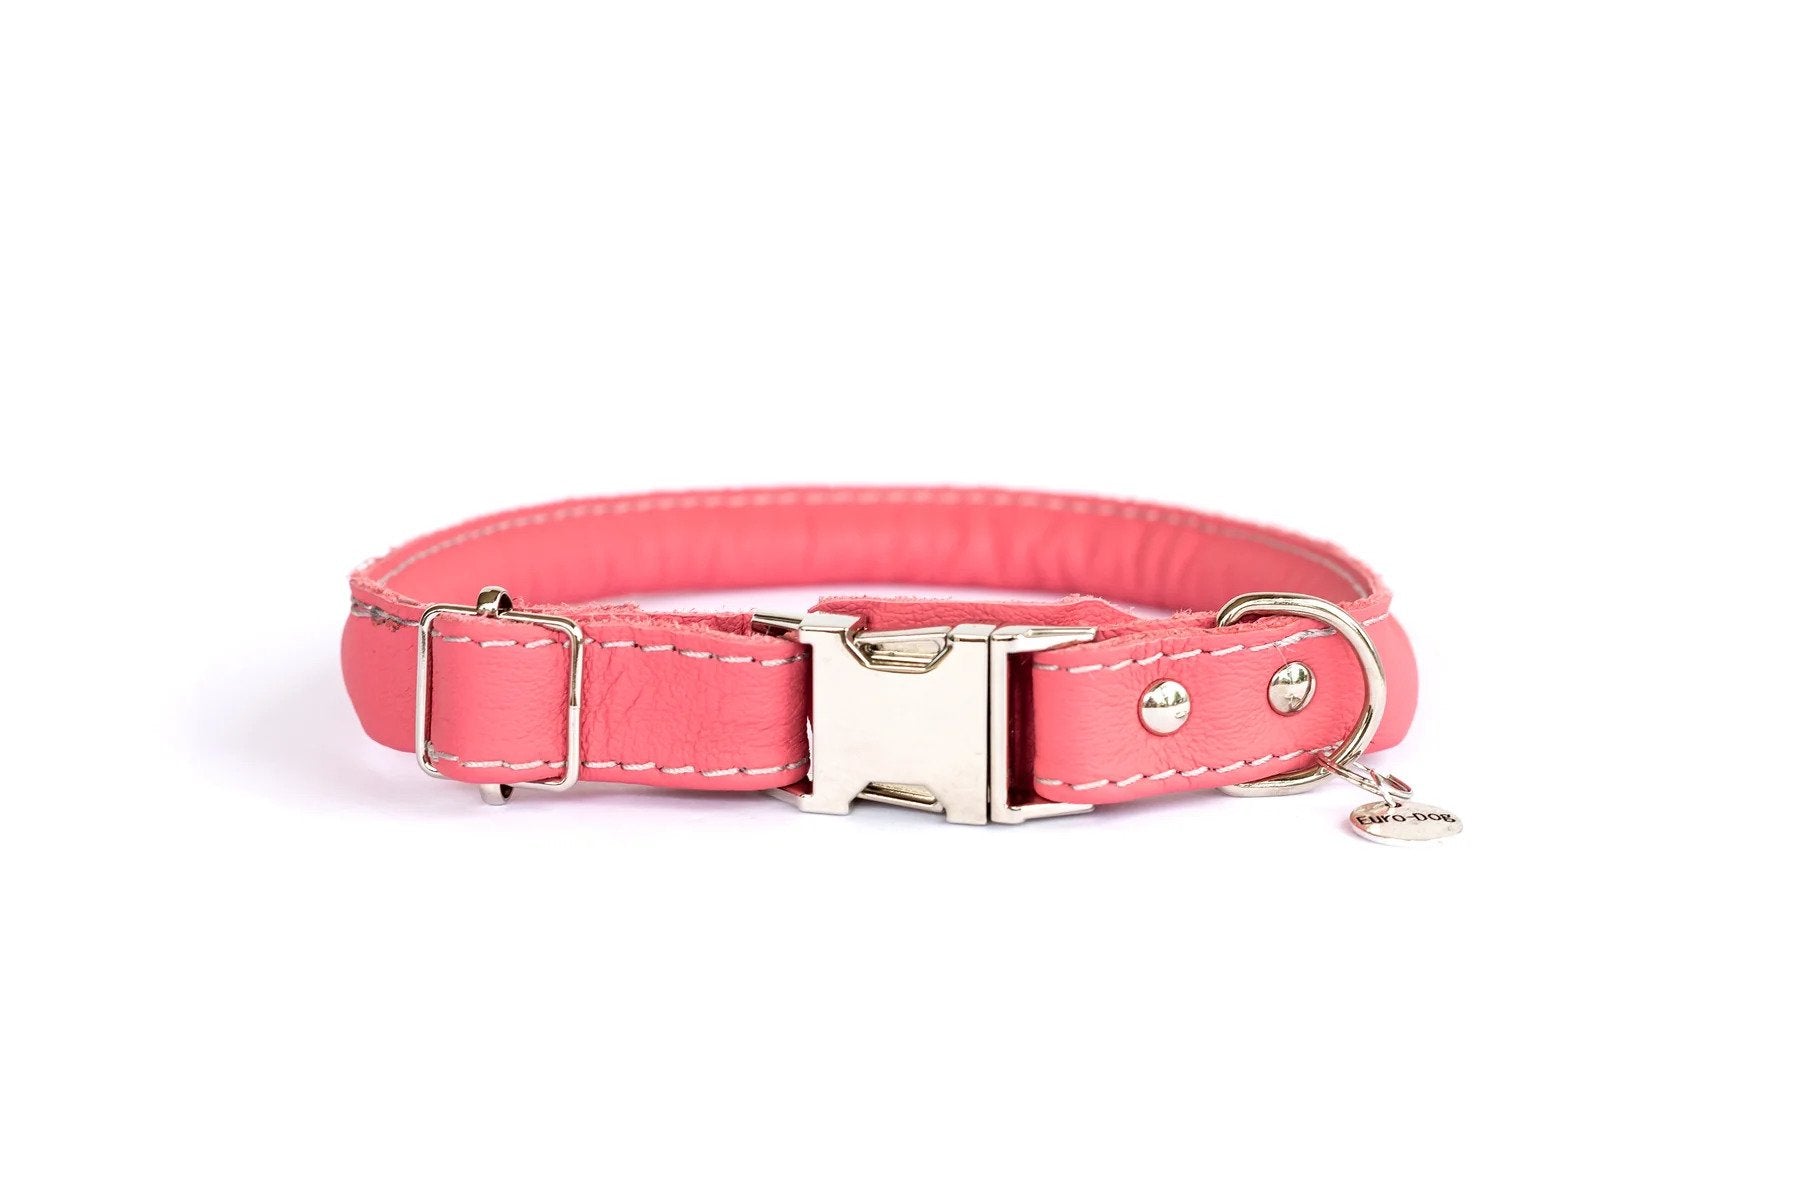 Eurodog Collars Soft Rolled Leather Quick Release Buckle Dog Collar Very Soft Coral Leather